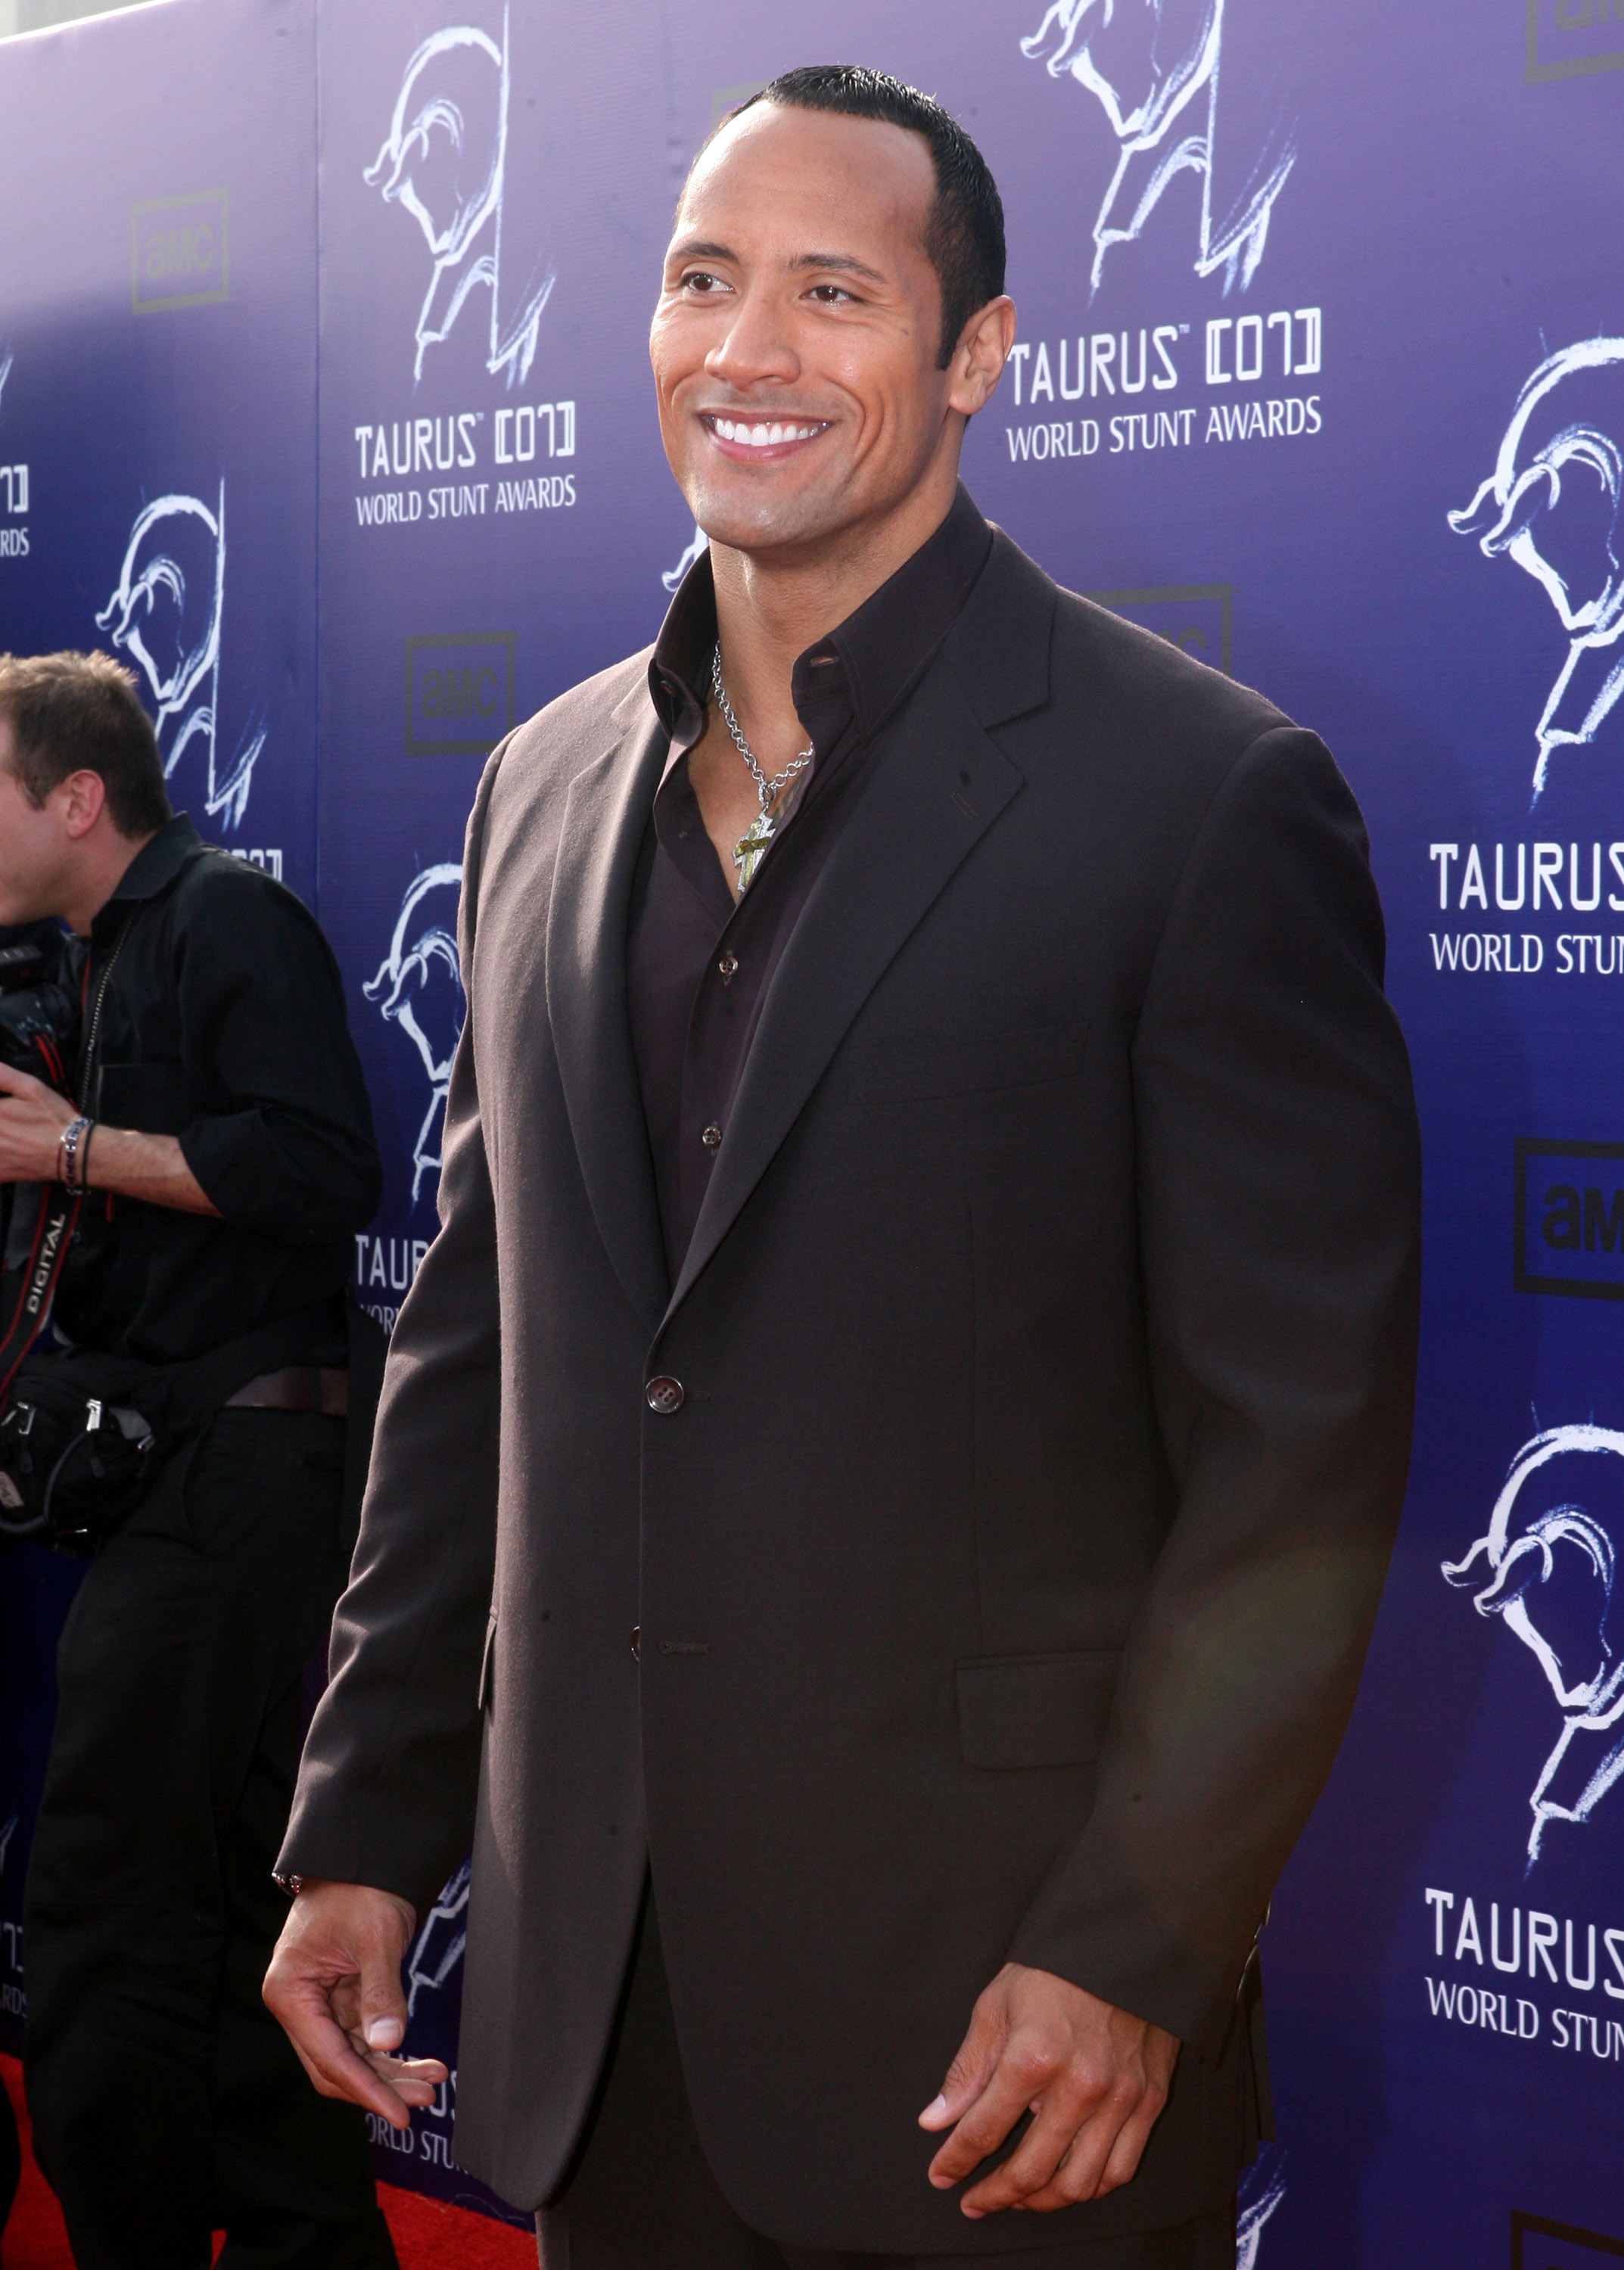 Dwayne on the red carpet in a suit, no tie